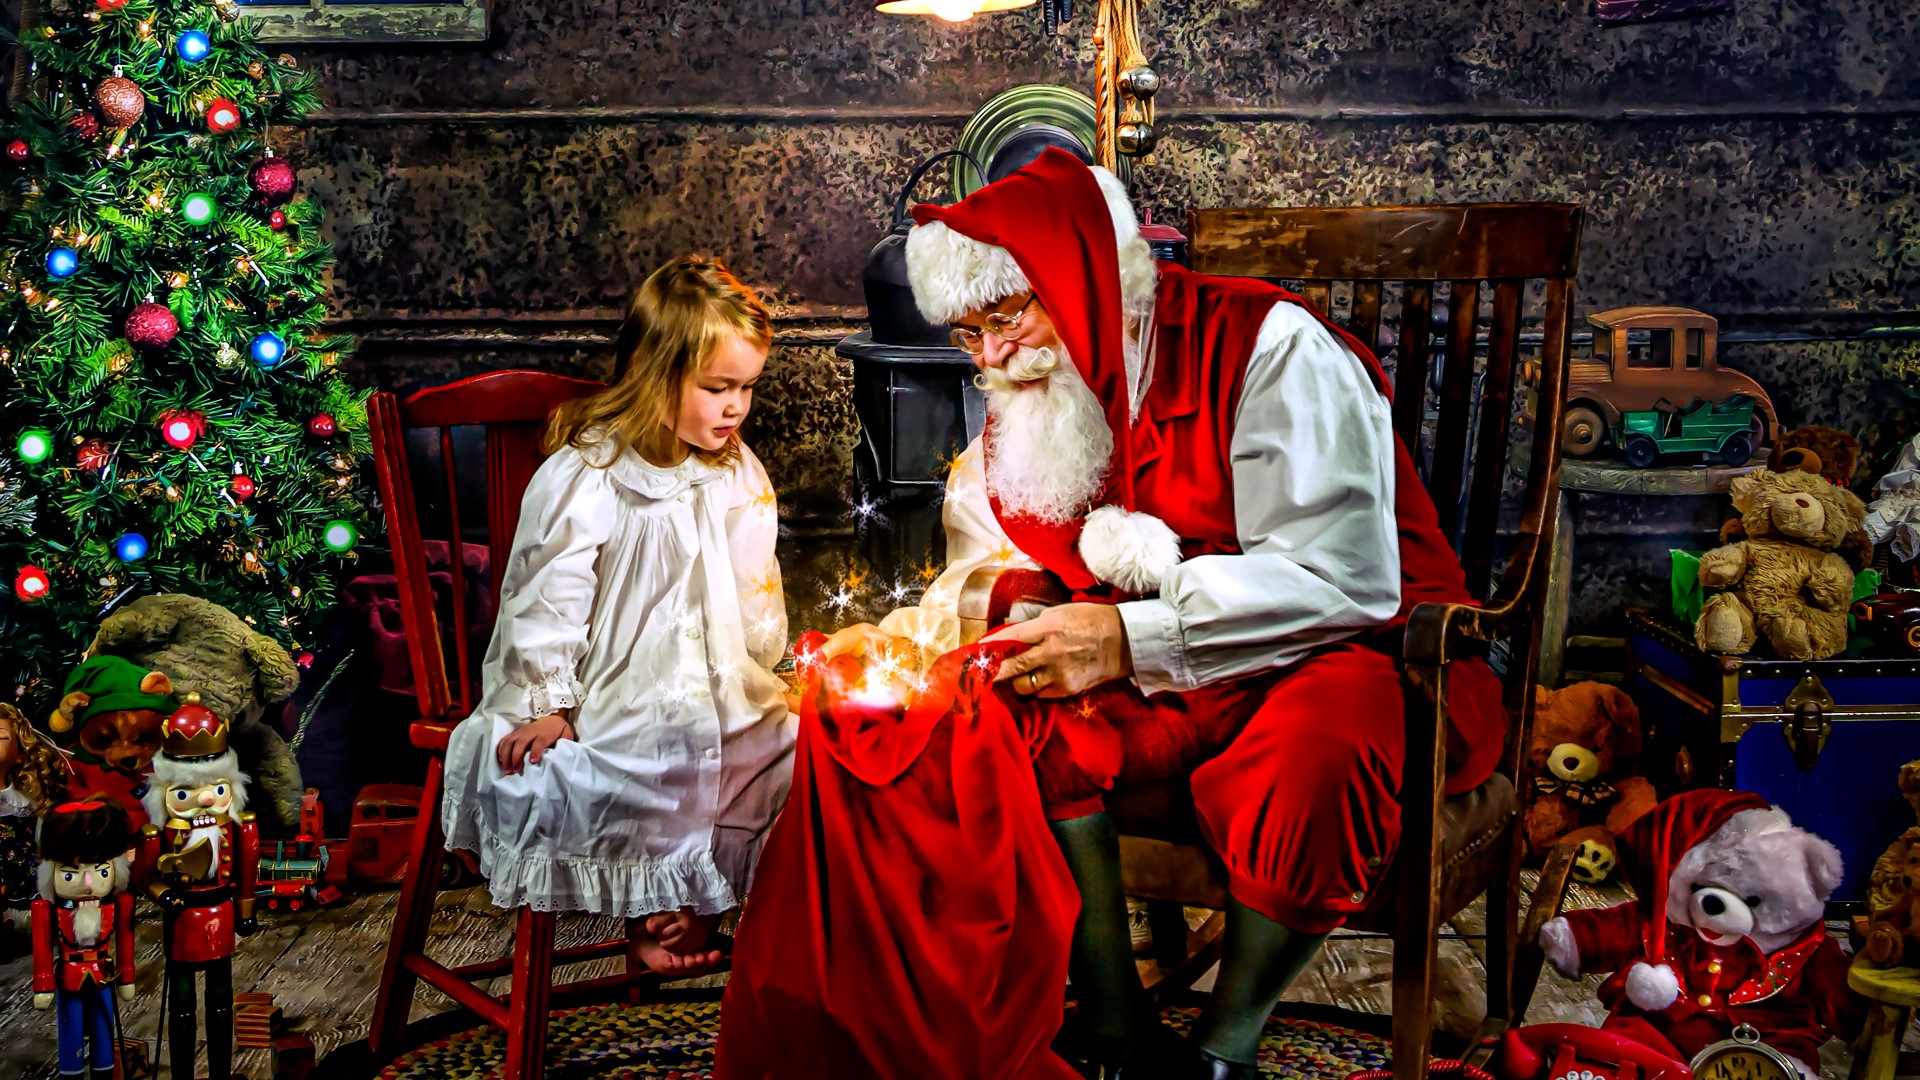 Dealing with nerves when visiting Santa | wfmynews2.com